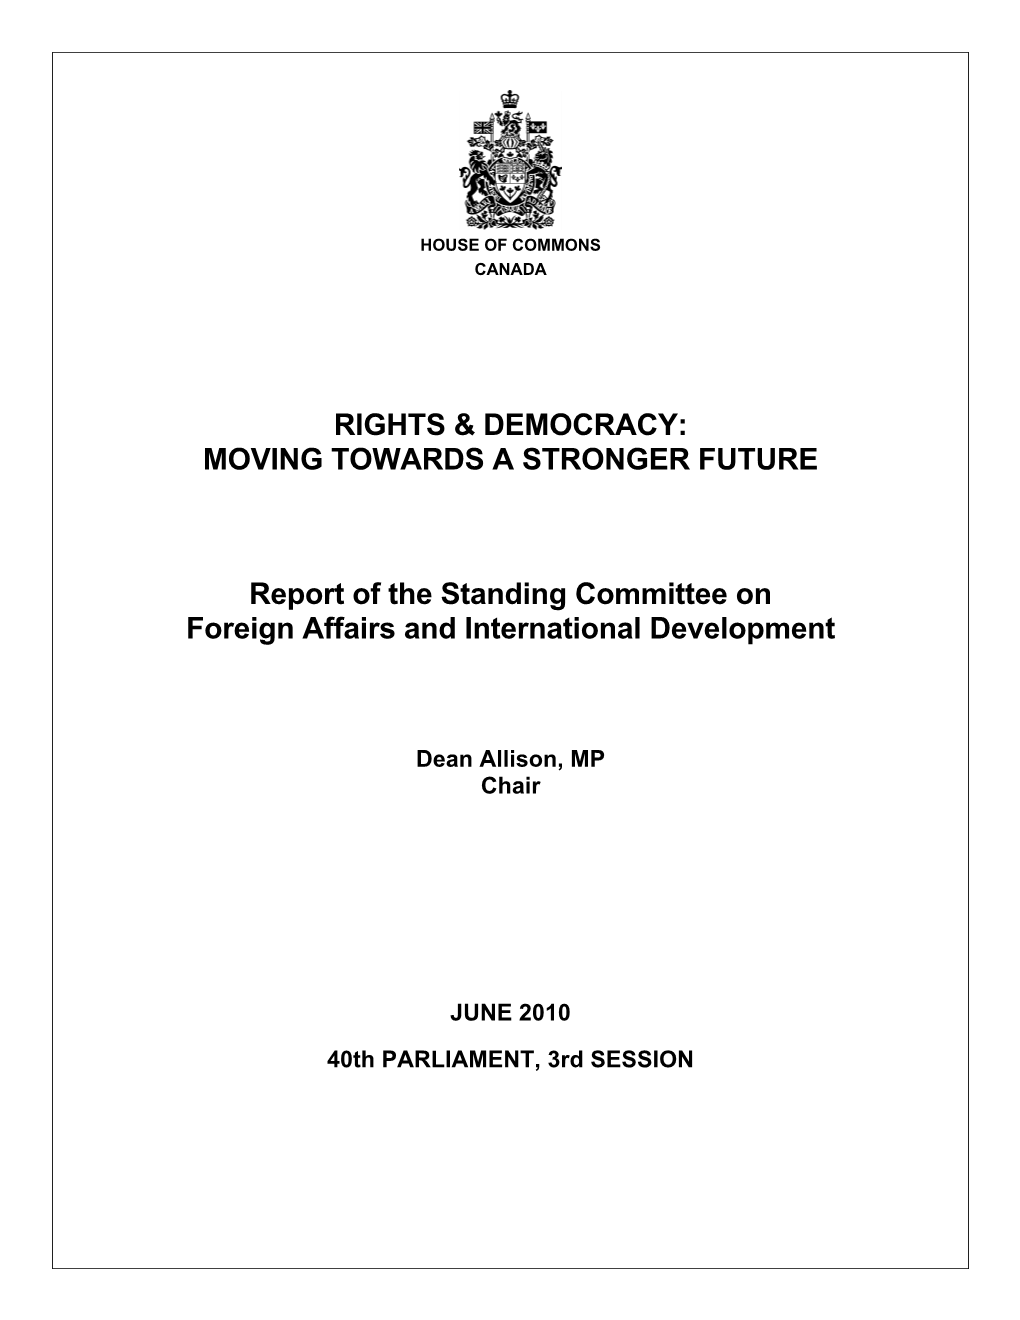 Rights & Democracy: Moving Towards a Stronger Future